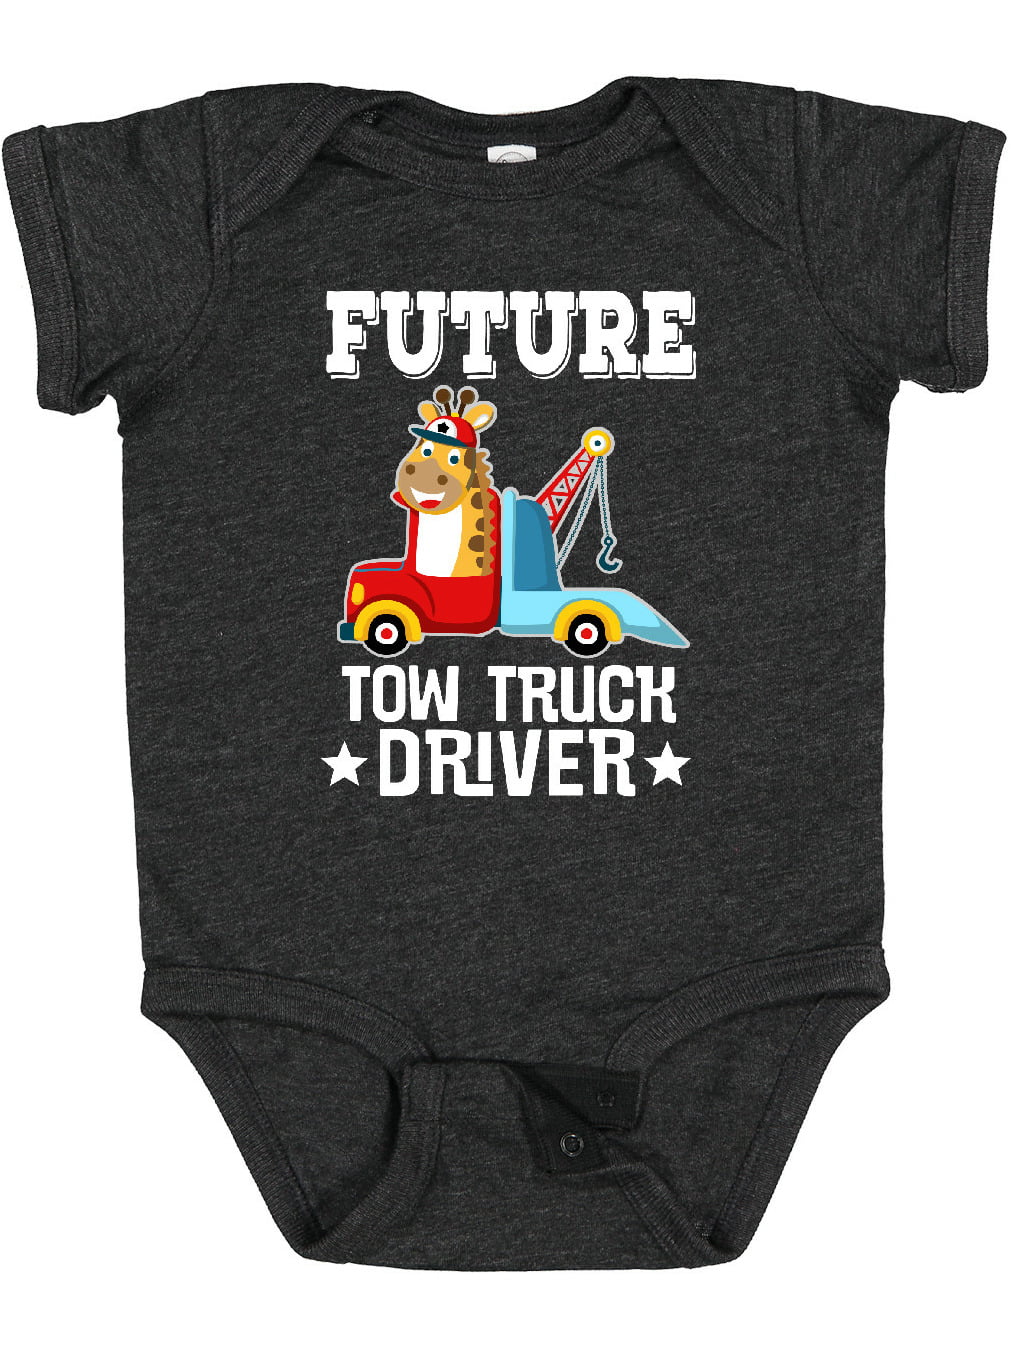 ROMPER BABY ONE PIECE printed with FUTURE CHEVROLET DRIVER cotton 